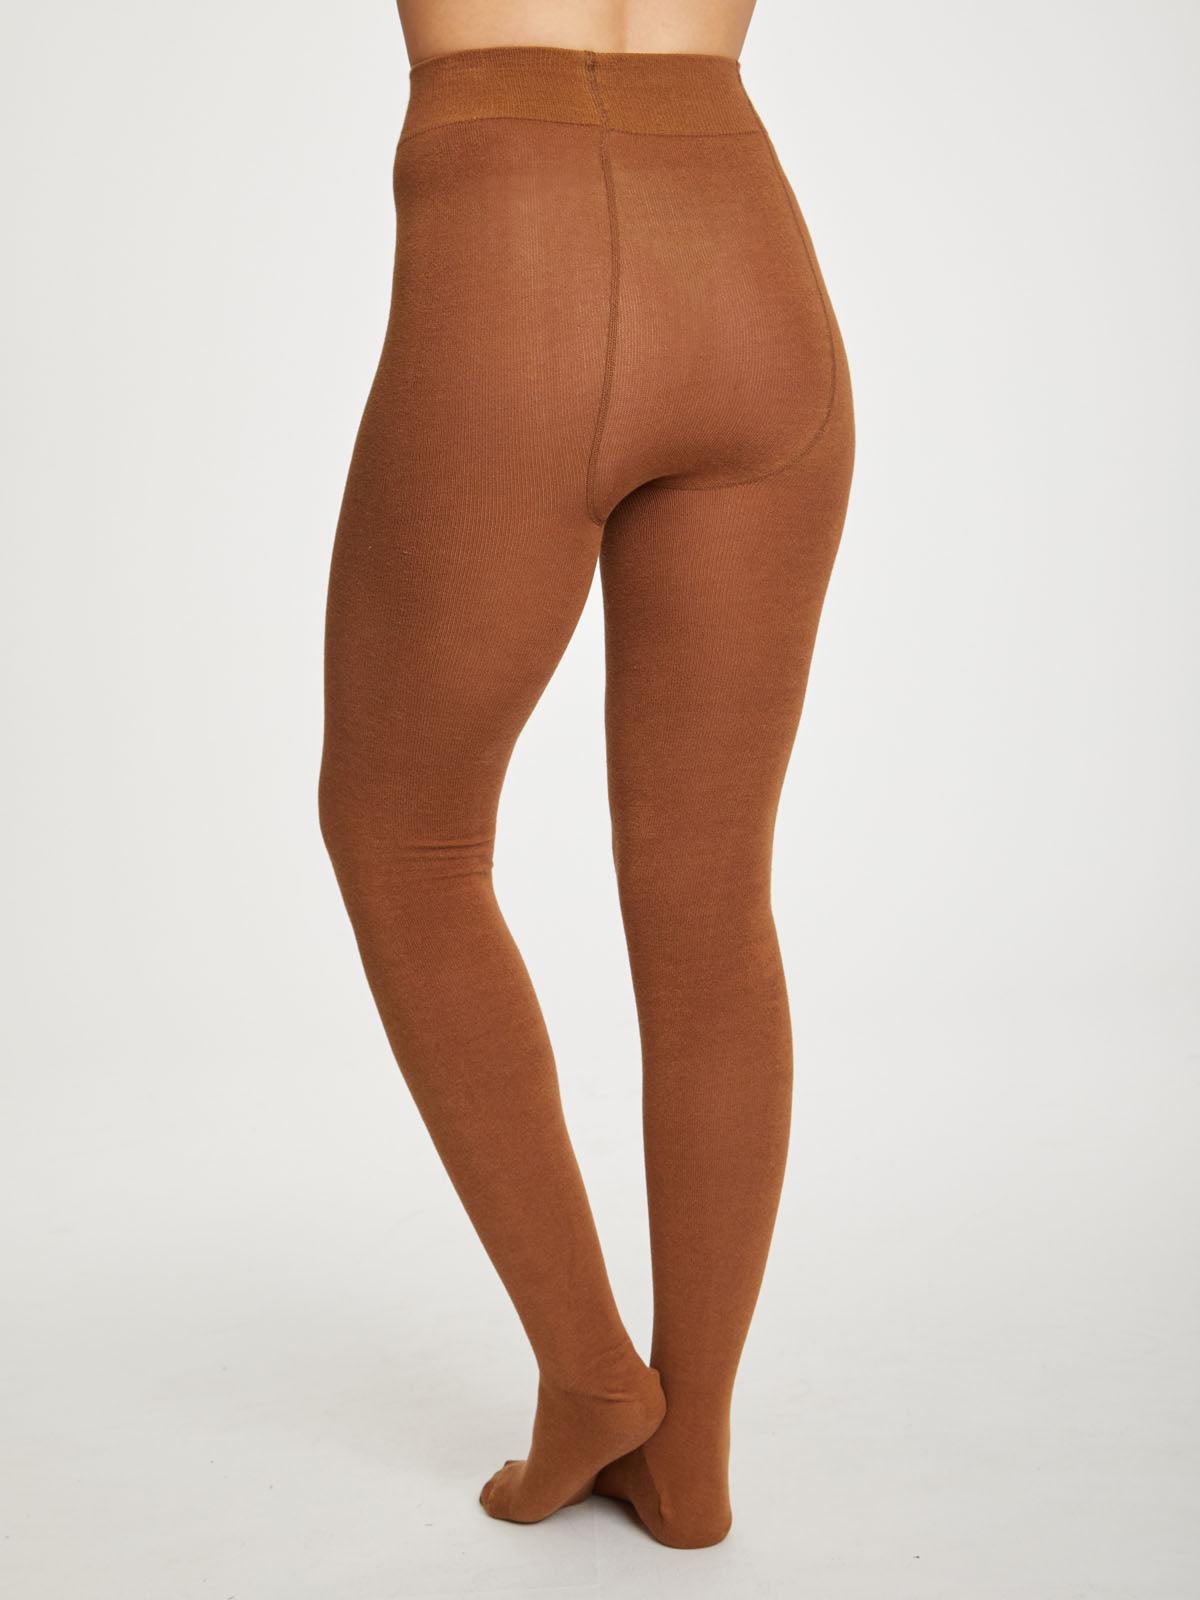 https://www.wearethought.com/cdn/shop/products/wac3866-toffee--brown-elgin-luxe-sustainable-plain-bamboo-tights--2.jpg?v=1654533100&width=1200